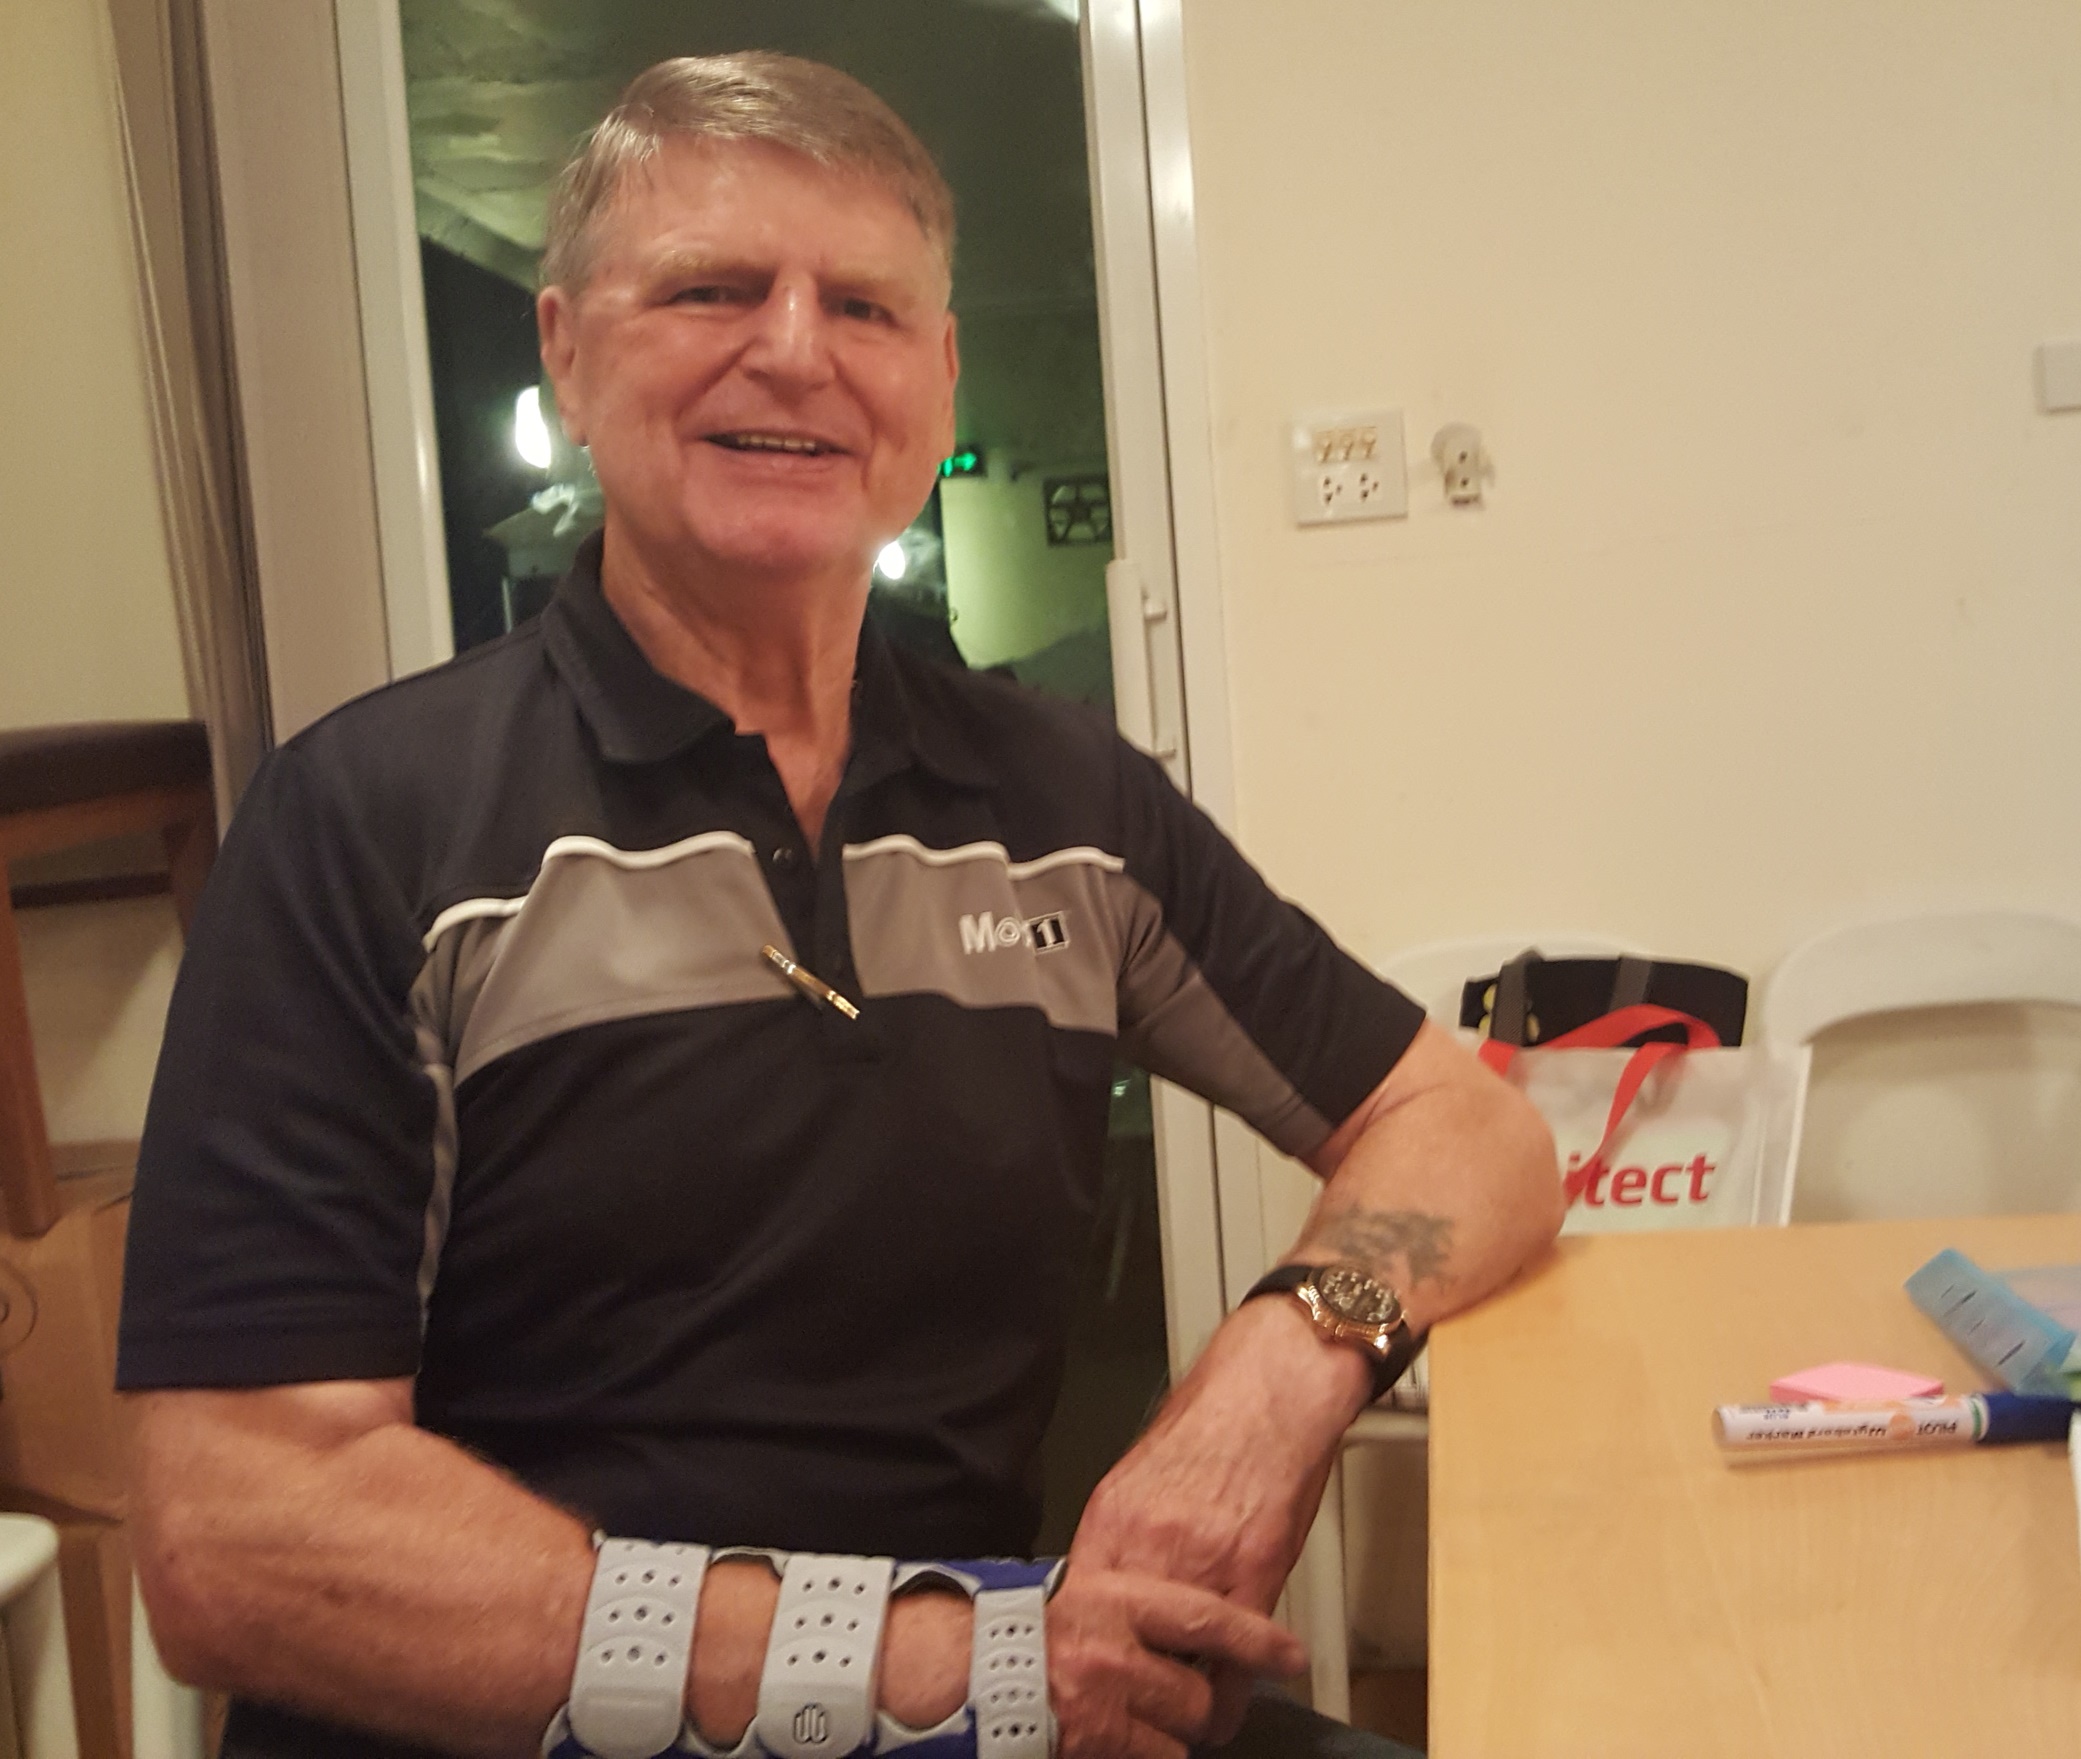 Jorgen Lundbaek is fully active both in his business and in his private life. The bandage on his right arm is from "testing my airbags" two weeks ago. 